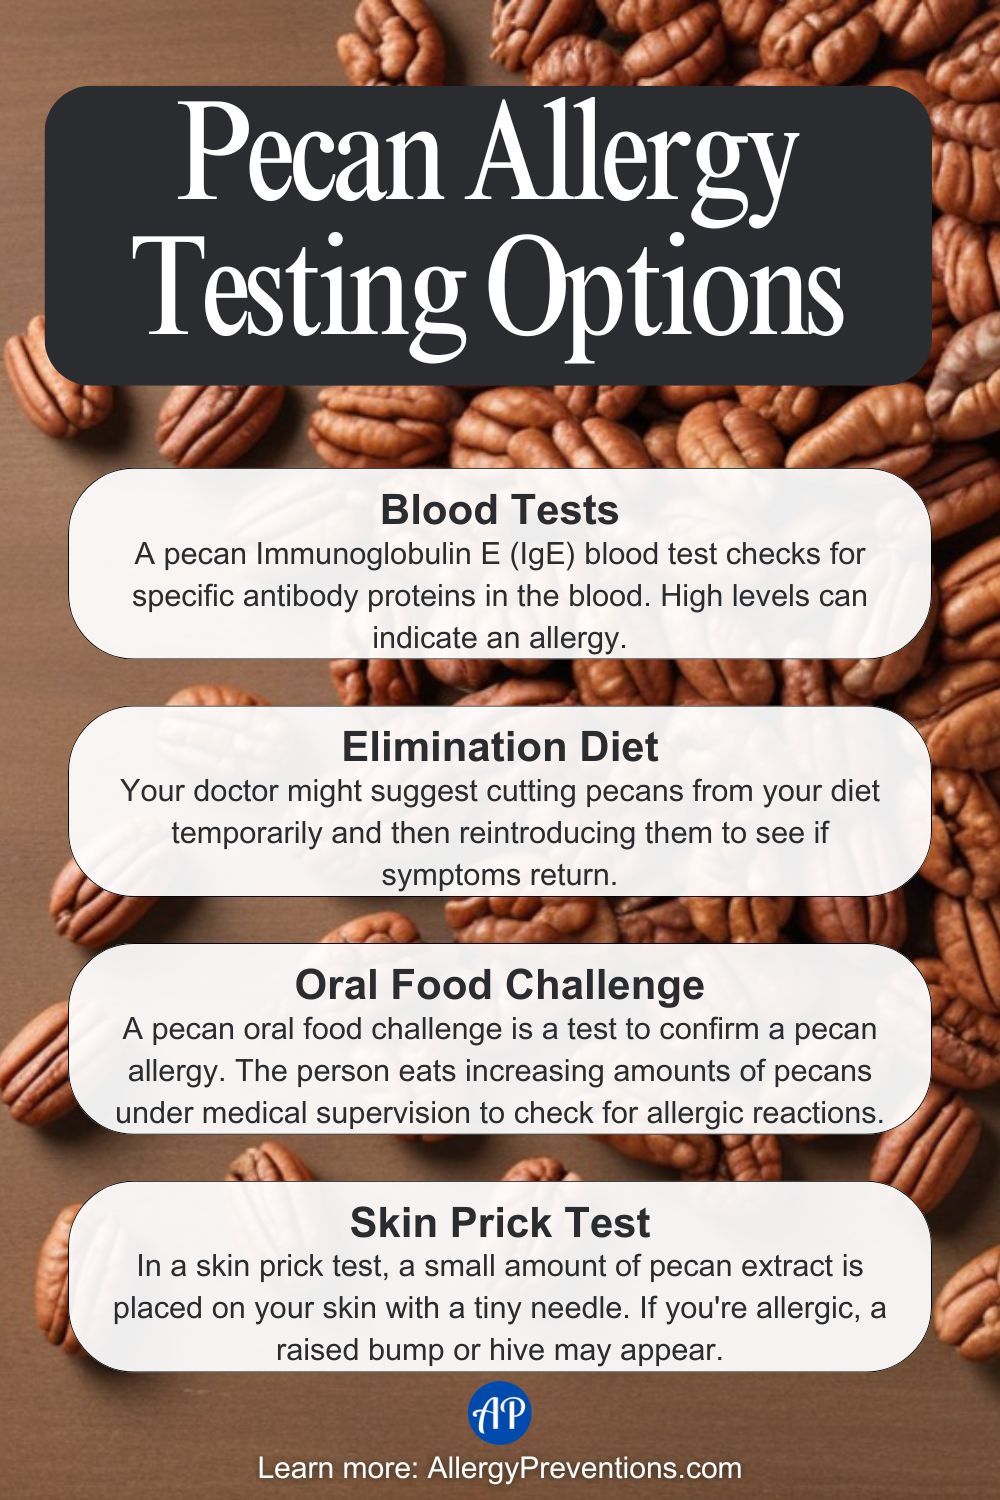 Pecan Nut Allergy Testing Options Infographic: Blood Tests: A pecan Immunoglobulin E (IgE) blood test checks for specific antibody proteins in the blood. High levels can indicate an allergy. Elimination Diet: Your doctor might suggest cutting pecans from your diet temporarily and then reintroducing them to see if symptoms return. Oral Food Challenge: A pecan oral food challenge is a test to confirm a pecan allergy. The person eats increasing amounts of pecans under medical supervision to check for allergic reactions. Skin Prick Test: In a skin prick test, a small amount of pecan extract is placed on your skin with a tiny needle. If you're allergic, a raised bump or hive may appear.